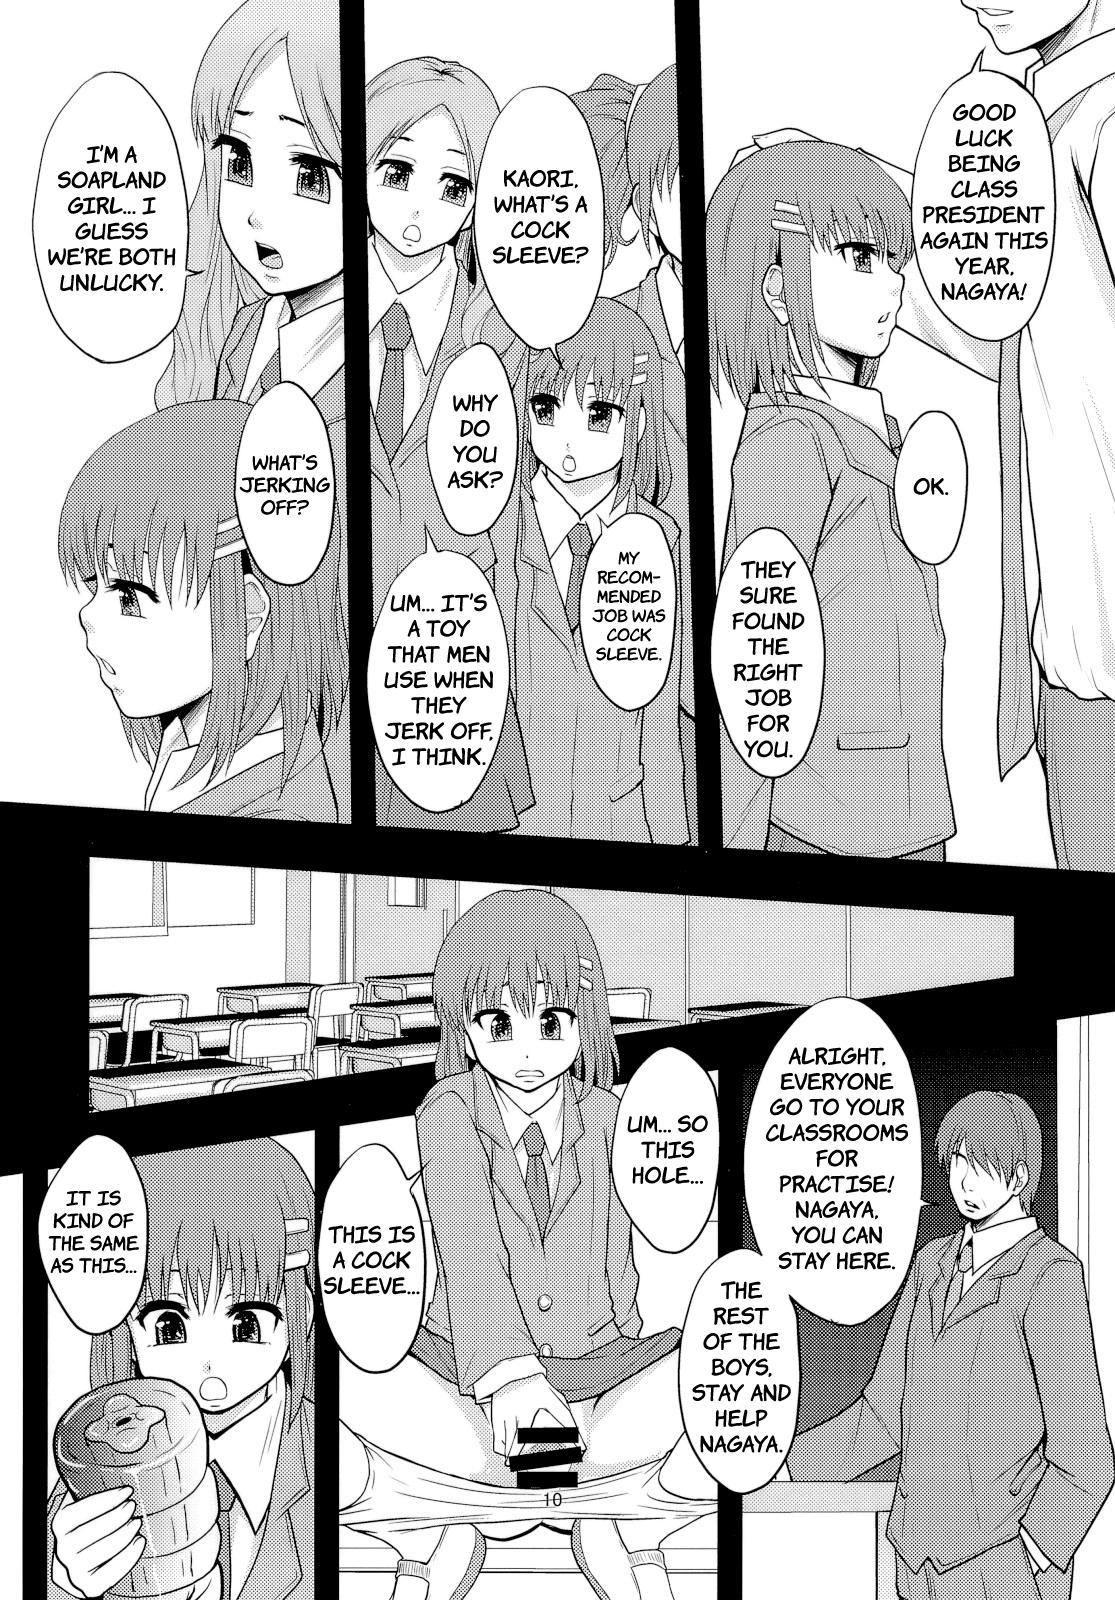 Desperate Ganbare Onaho-chan! | Good luck, Little Miss Cock Sleeve! Rough - Page 9